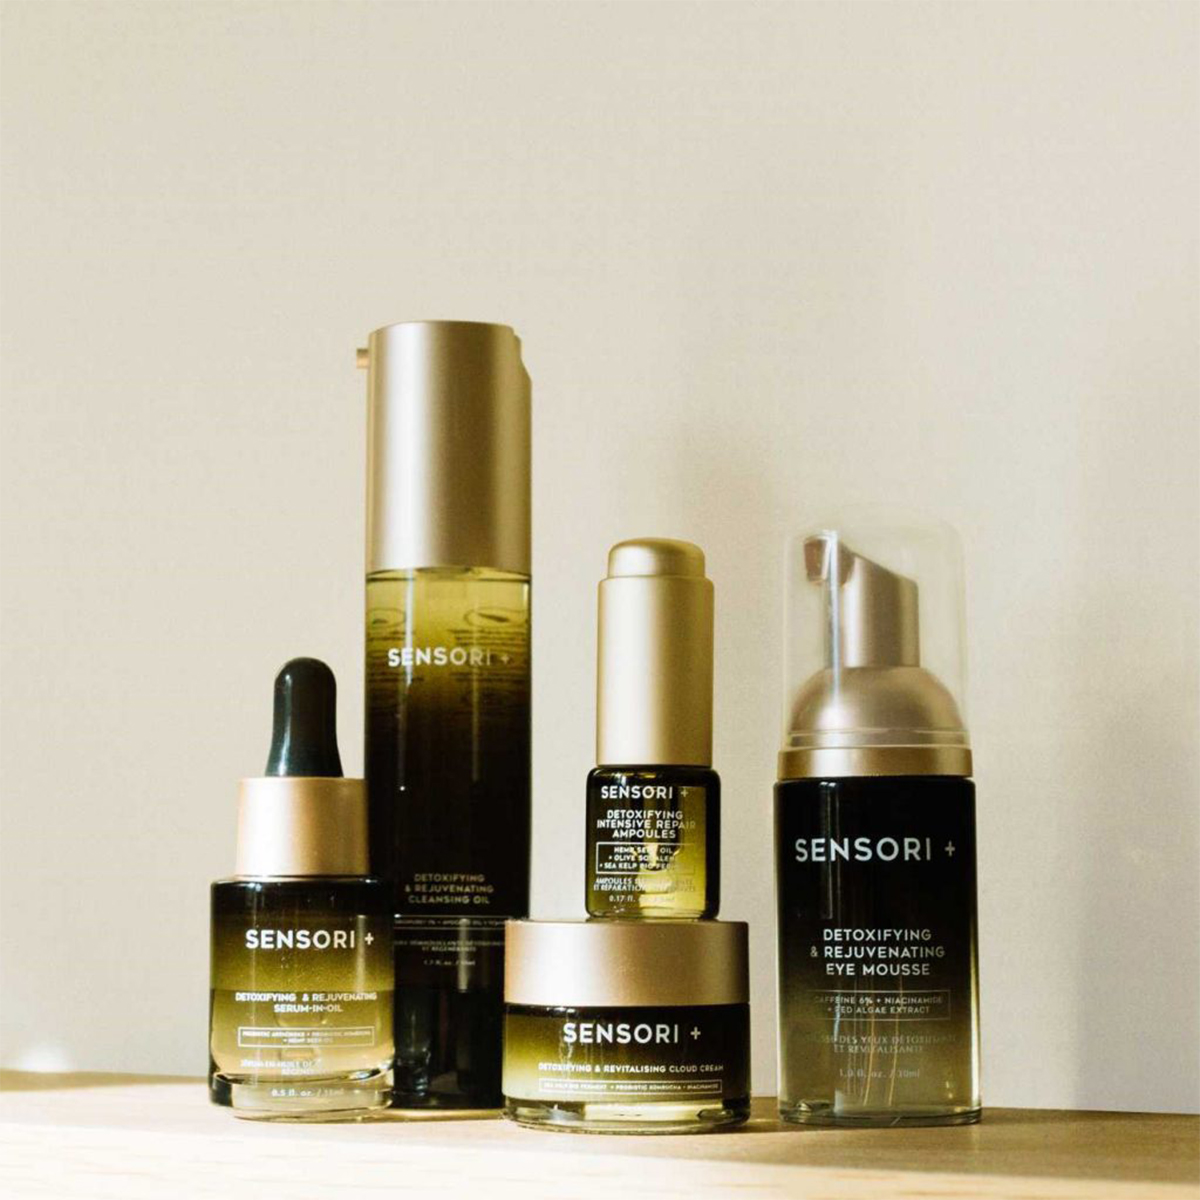 A selection of Sensori+ products in bottles